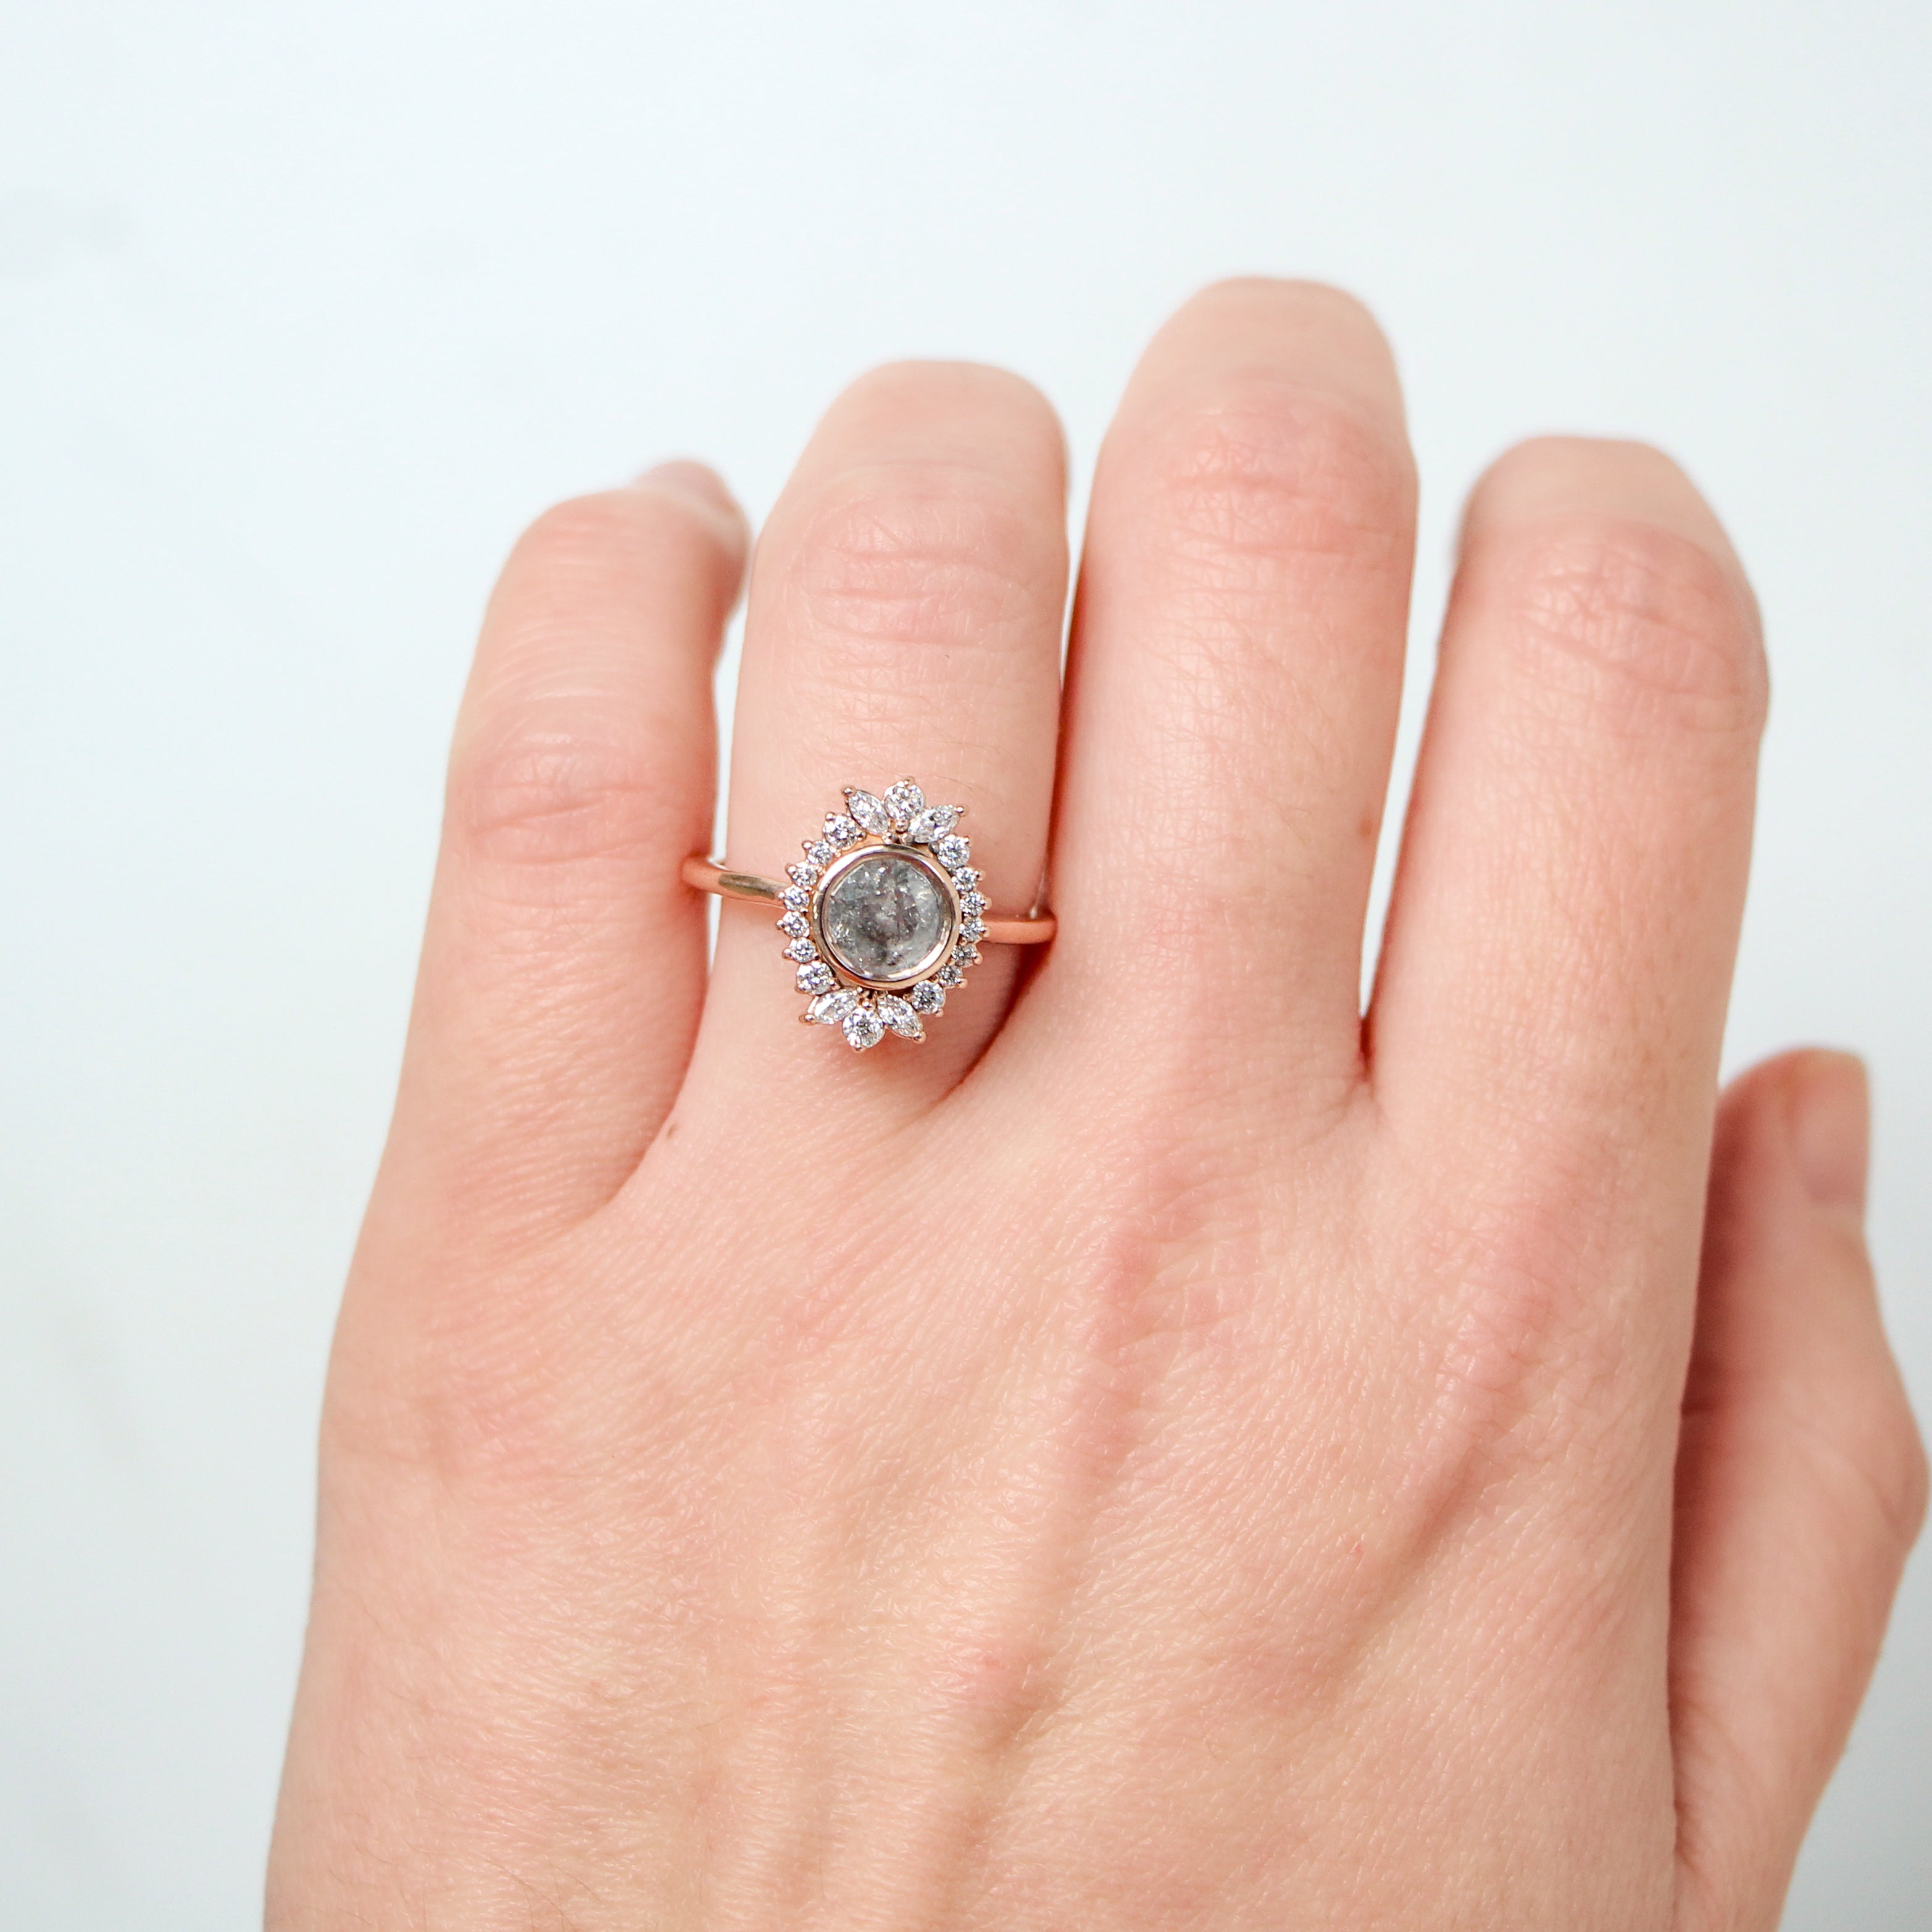 Juliette Ring with a 0.96 Gray Celestial Diamond in 10k Rose Gold - Ready to Size and Ship - Midwinter Co. Alternative Bridal Rings and Modern Fine Jewelry